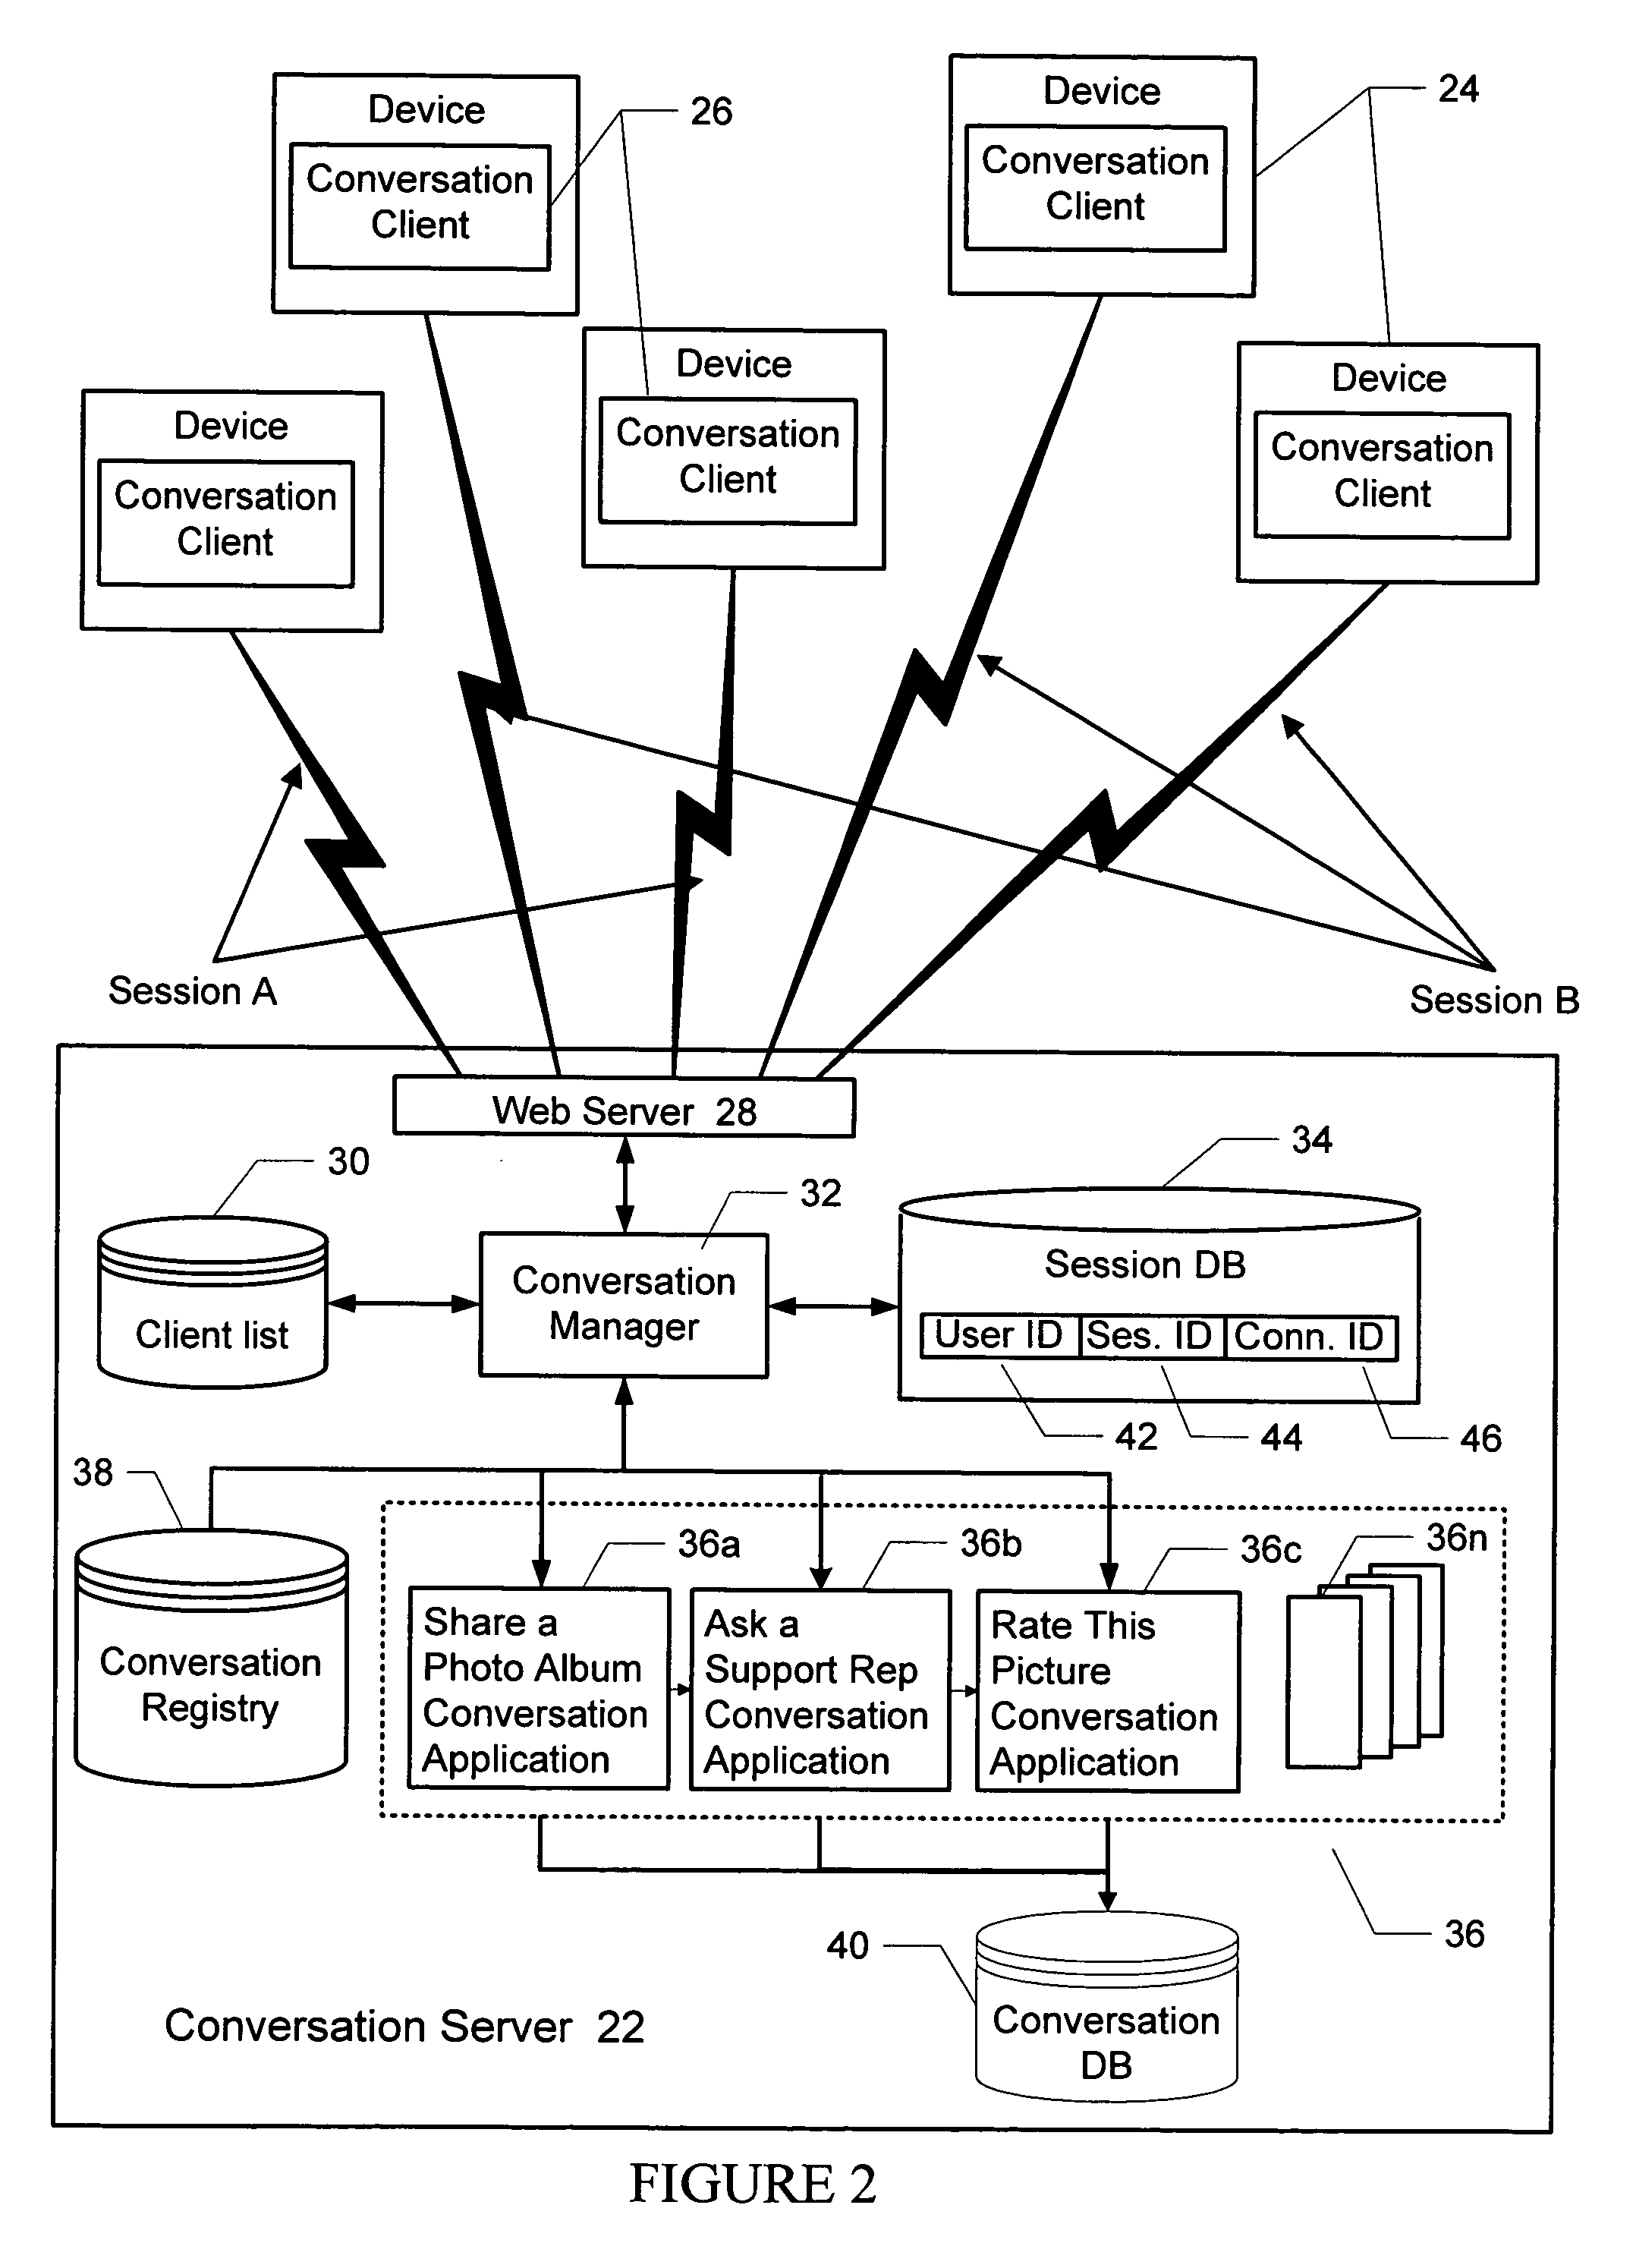 Method and system for enabling structured real-time conversations between multiple participants